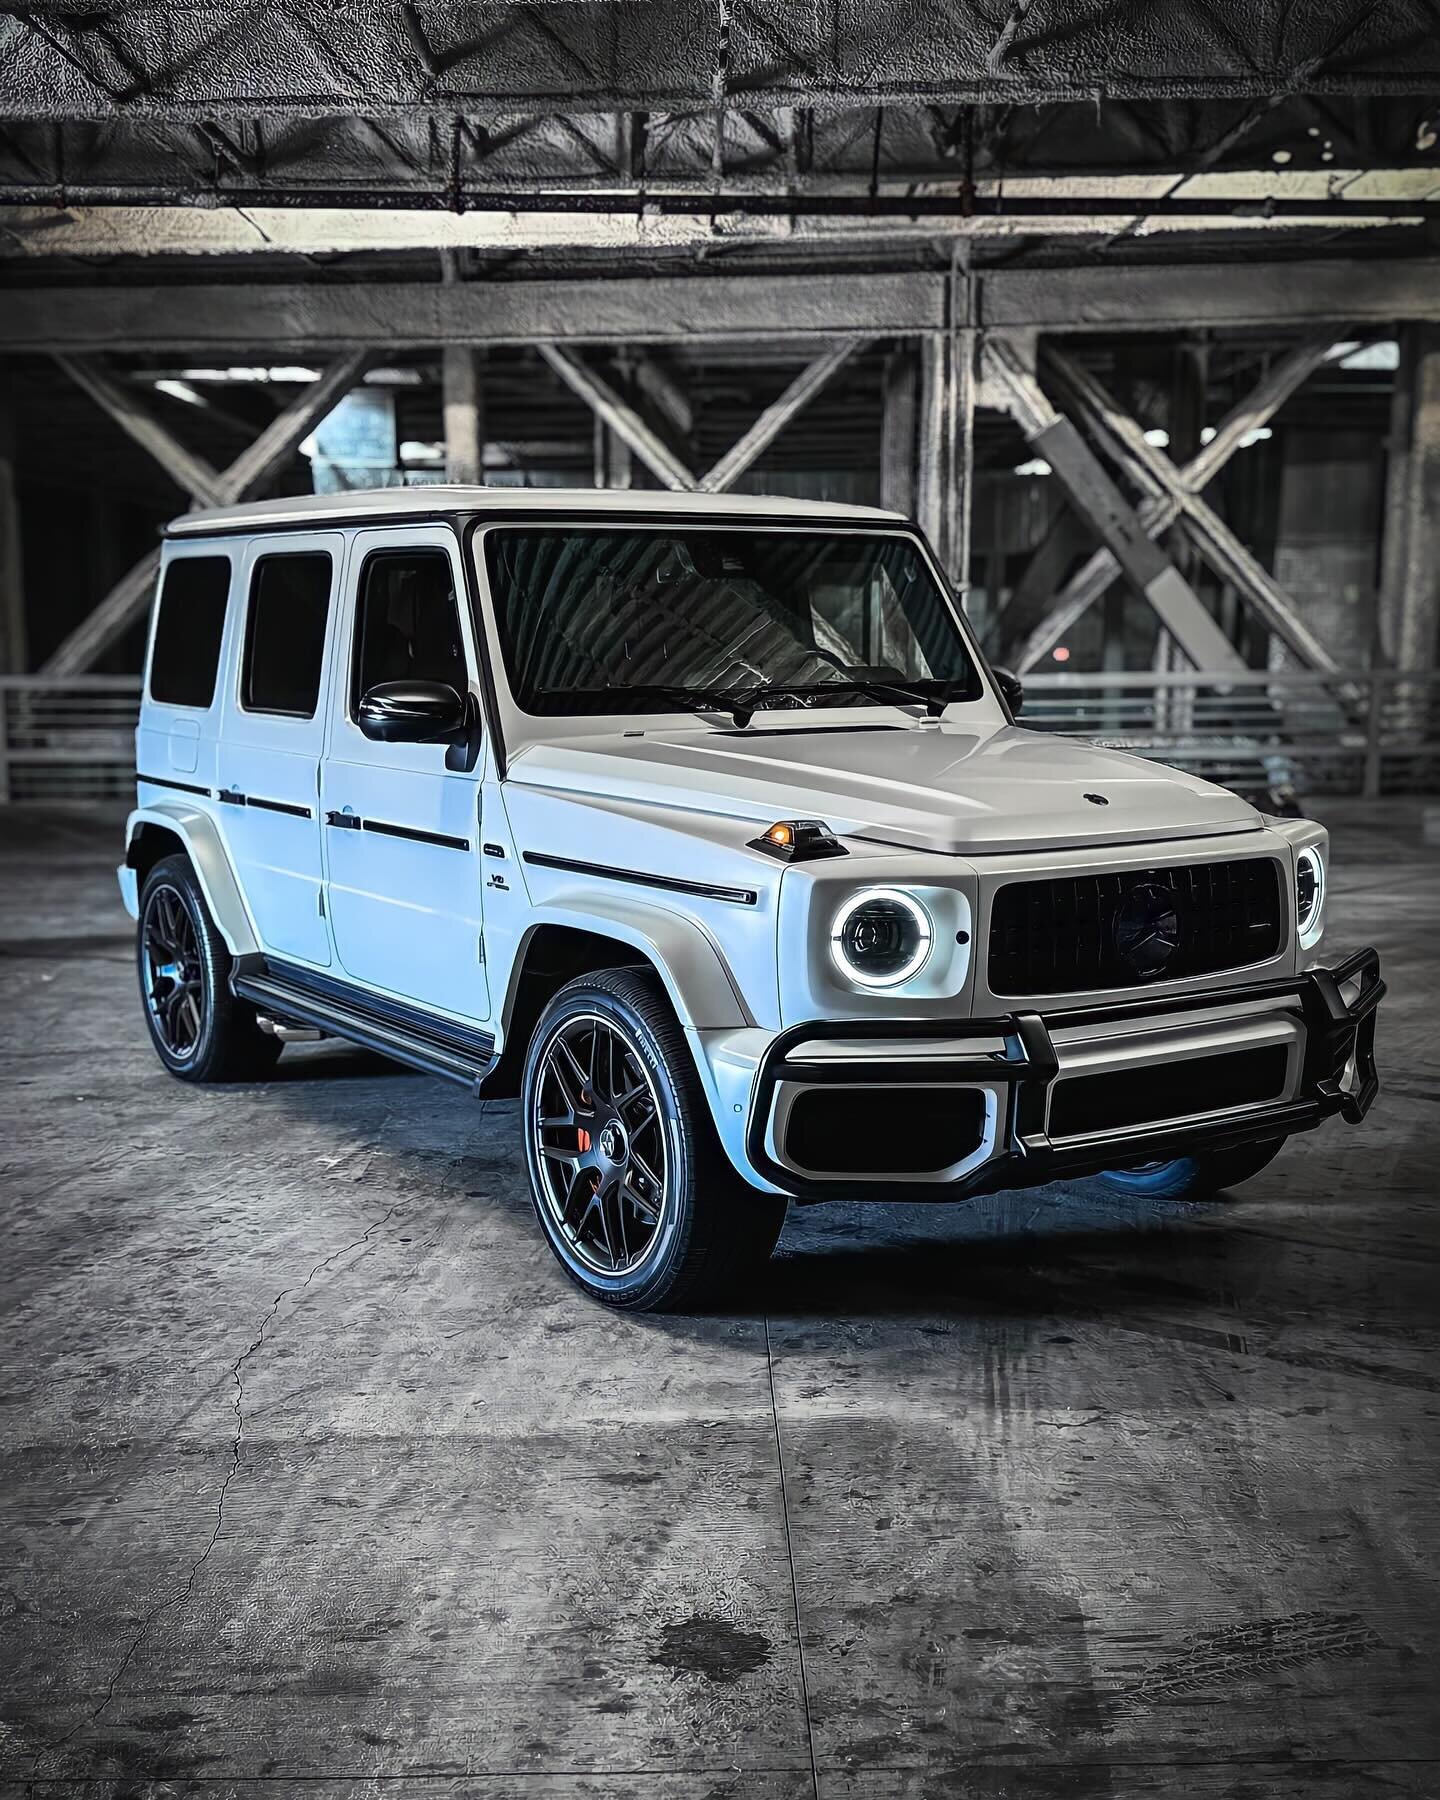 G63 Full exterior protected in Xpel Ultimate Stealth PPF w/ Satin black chrome delete #mercedes #gwagon #g63 #amg #ppf #xpelstealth #matteppf #mobileservice #mobilewraps #thewrapdistrict #thewrapdistrictla #vinylwrap #wrapped #paintisdead